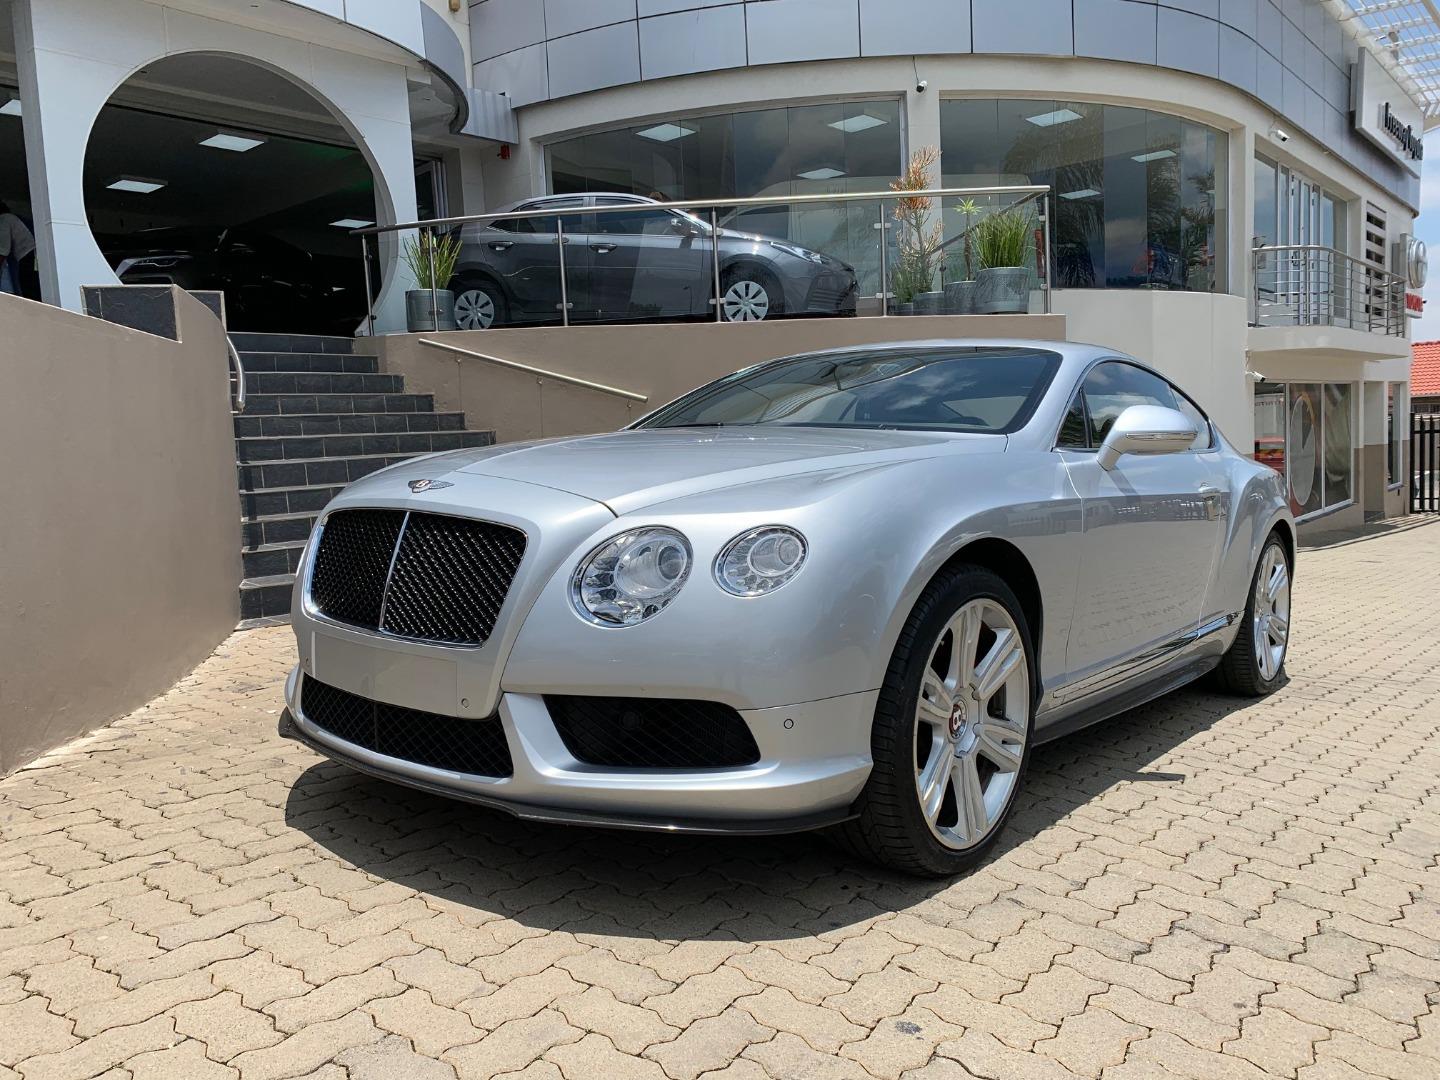 2013 Bentley Continental Gt for sale - 322530